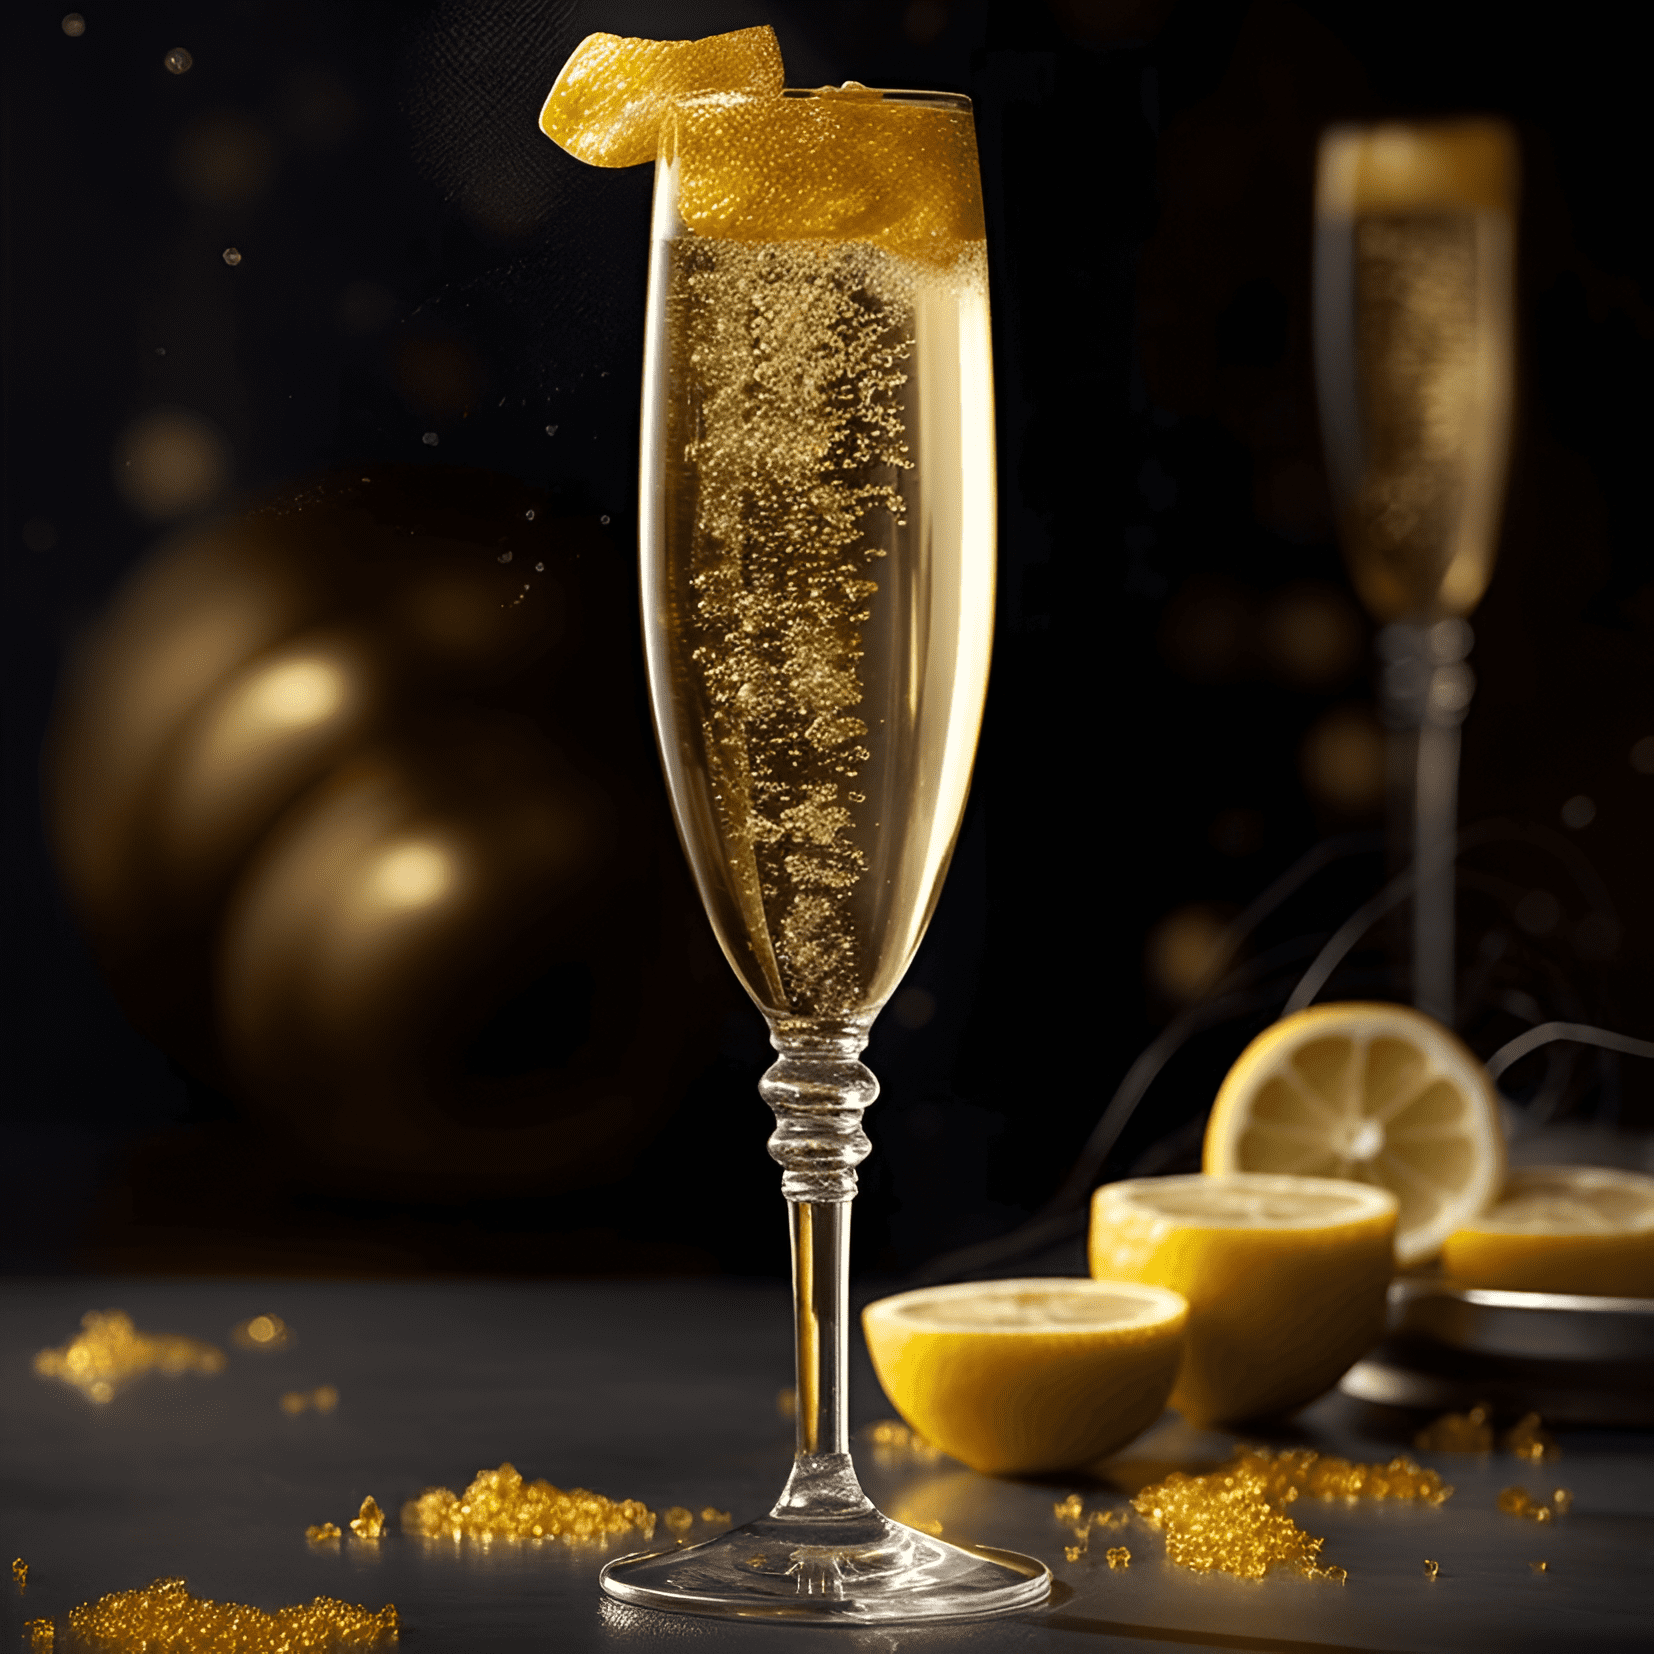 Champagne Cocktail Recipe - The Champagne Cocktail has a delightful balance of flavors, with the sweetness of the sugar cube and the bitterness of the Angostura bitters complementing the crisp, dry taste of the champagne. The drink is effervescent, refreshing, and slightly fruity.